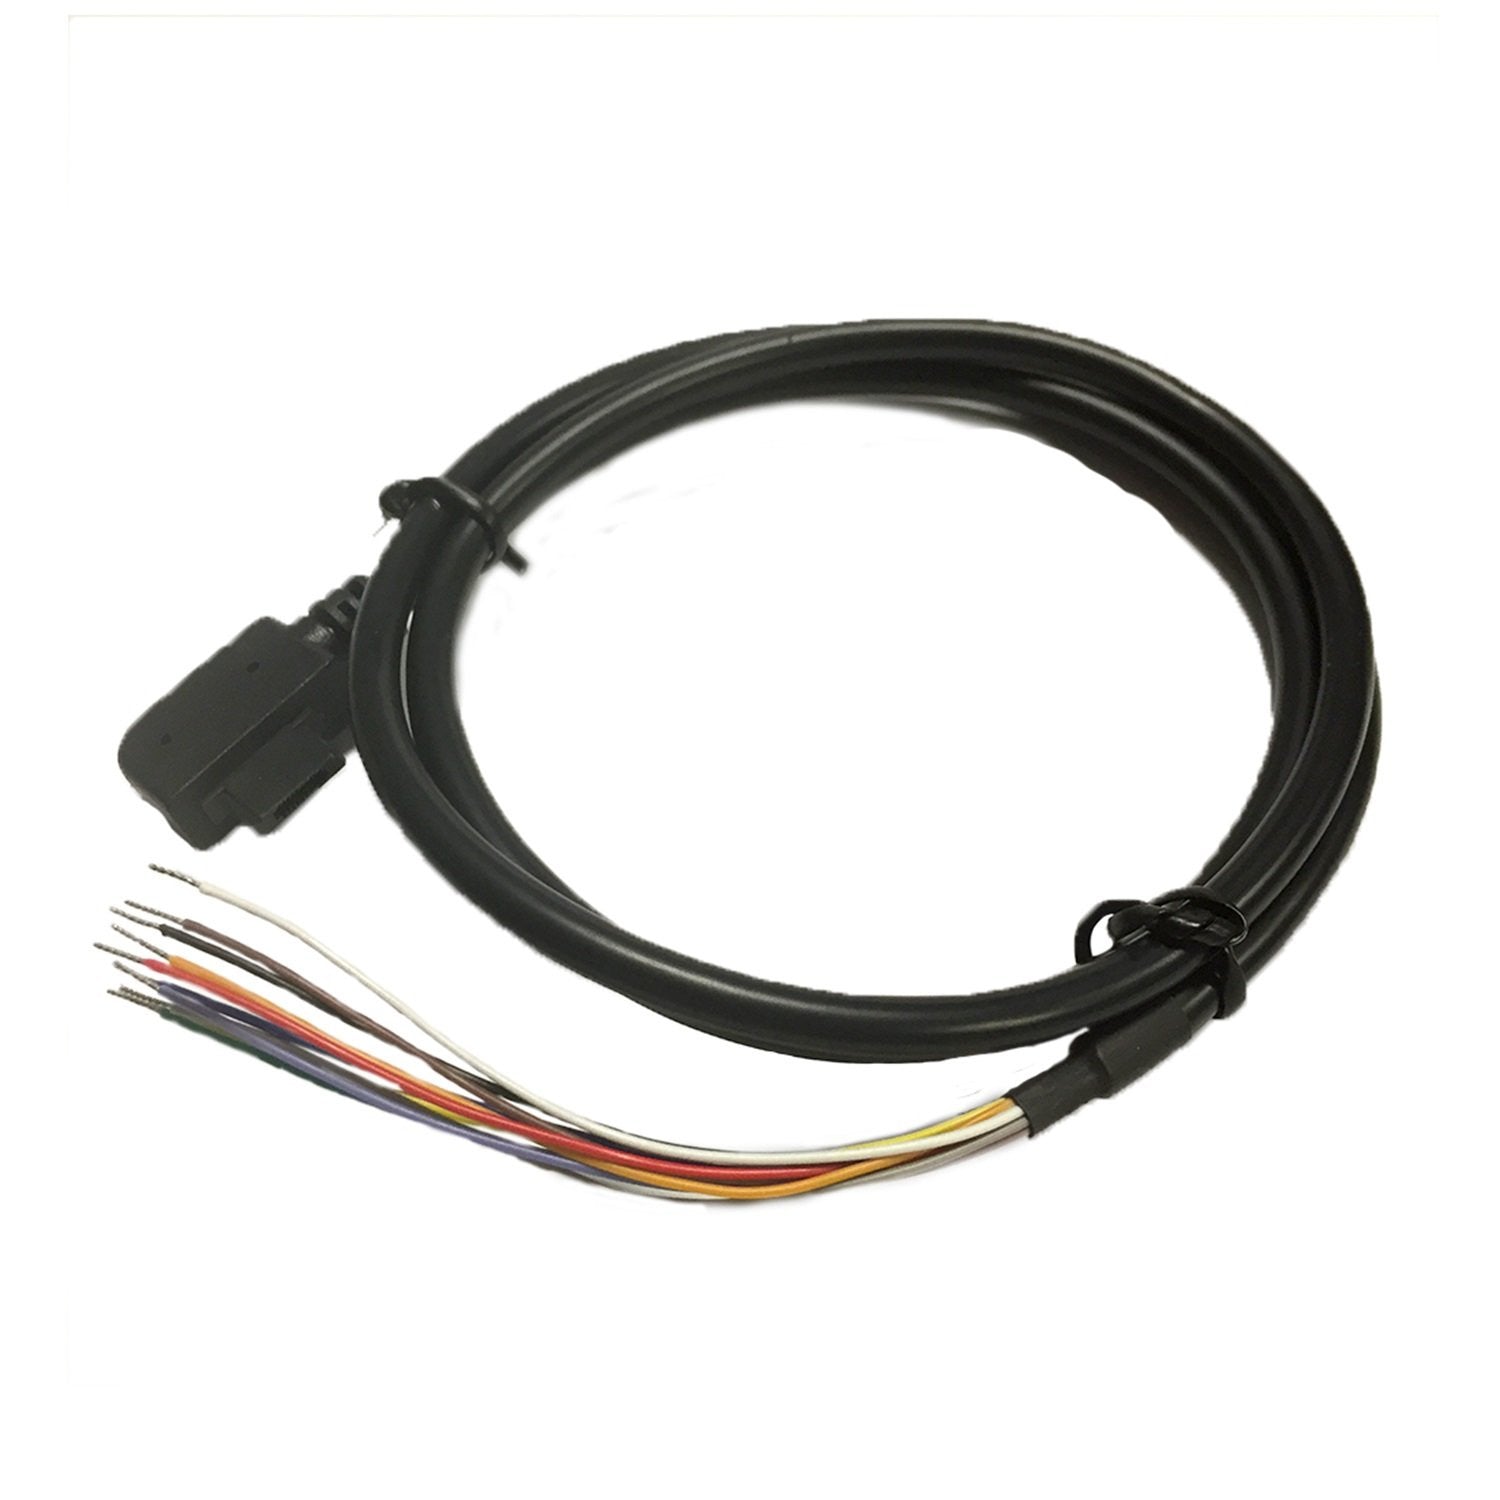 ITSX/TSX for Android Analog Cable SCT Performance - Computer Chip Programmer Input Cable|Computer Chip Programmer|Performance Electronics|Performance - SCT Performance - Texas Complete Truck Center